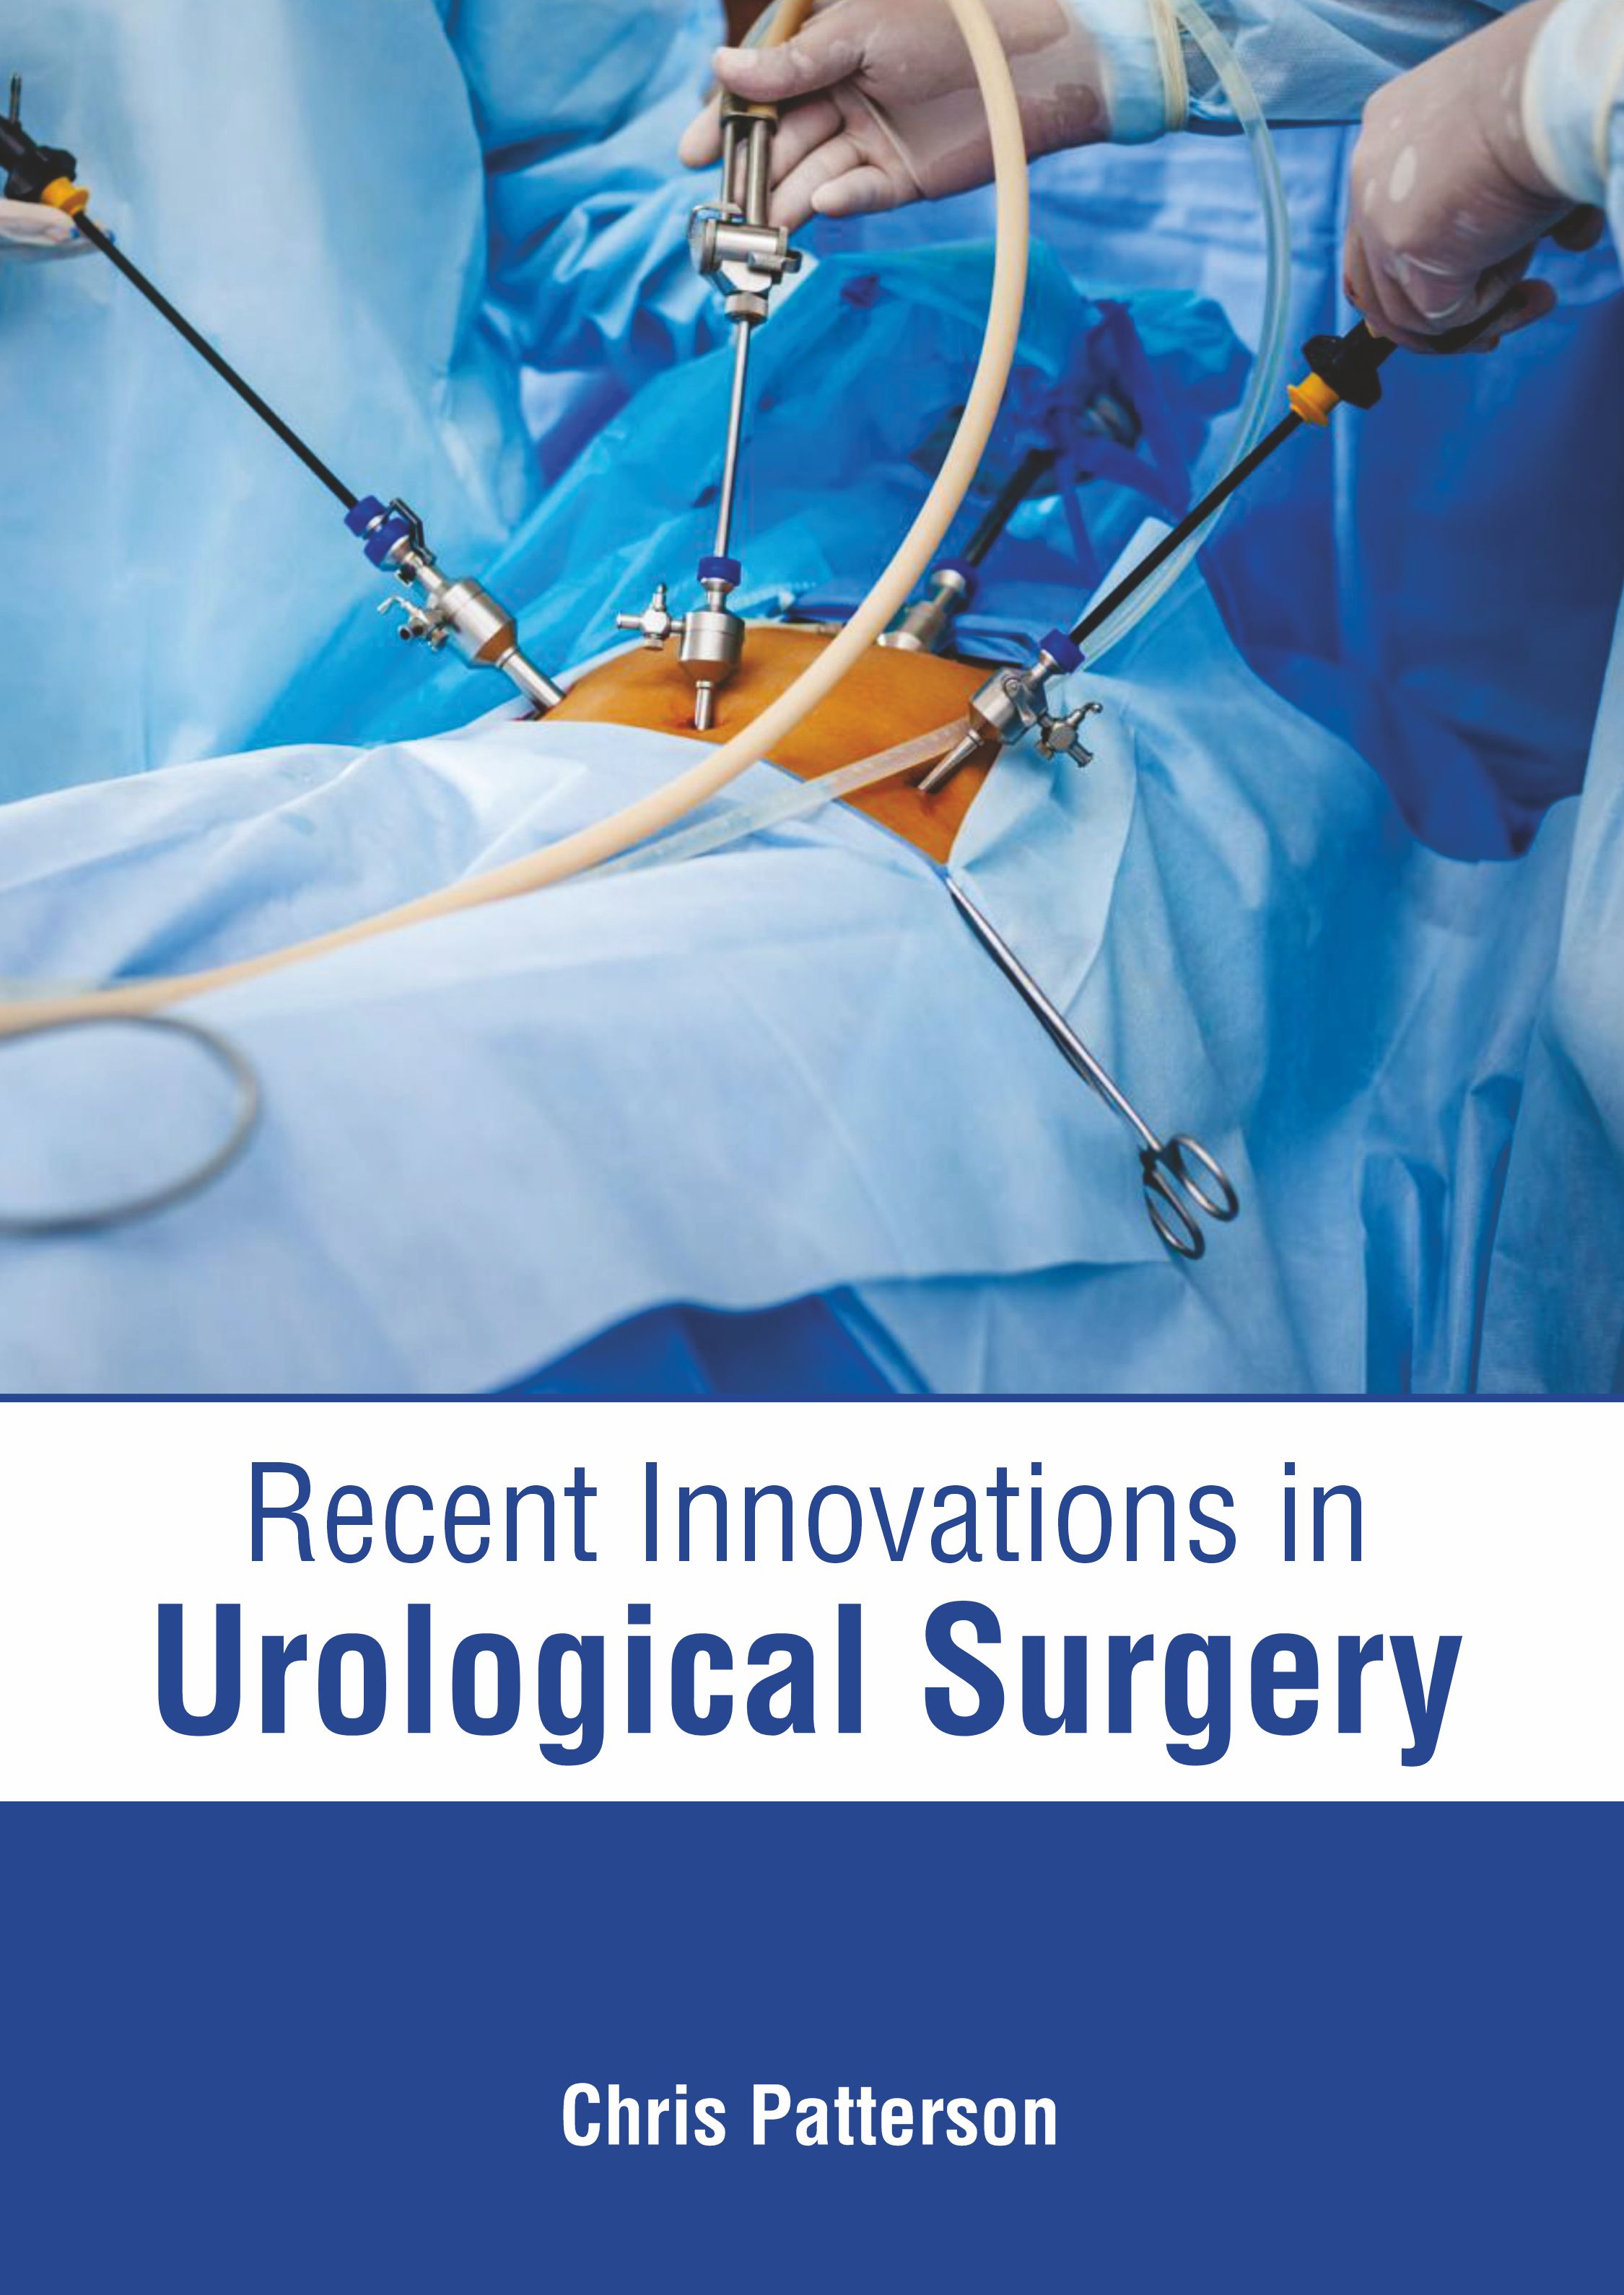 RECENT INNOVATIONS IN UROLOGICAL SURGERY- ISBN: 9781639274970